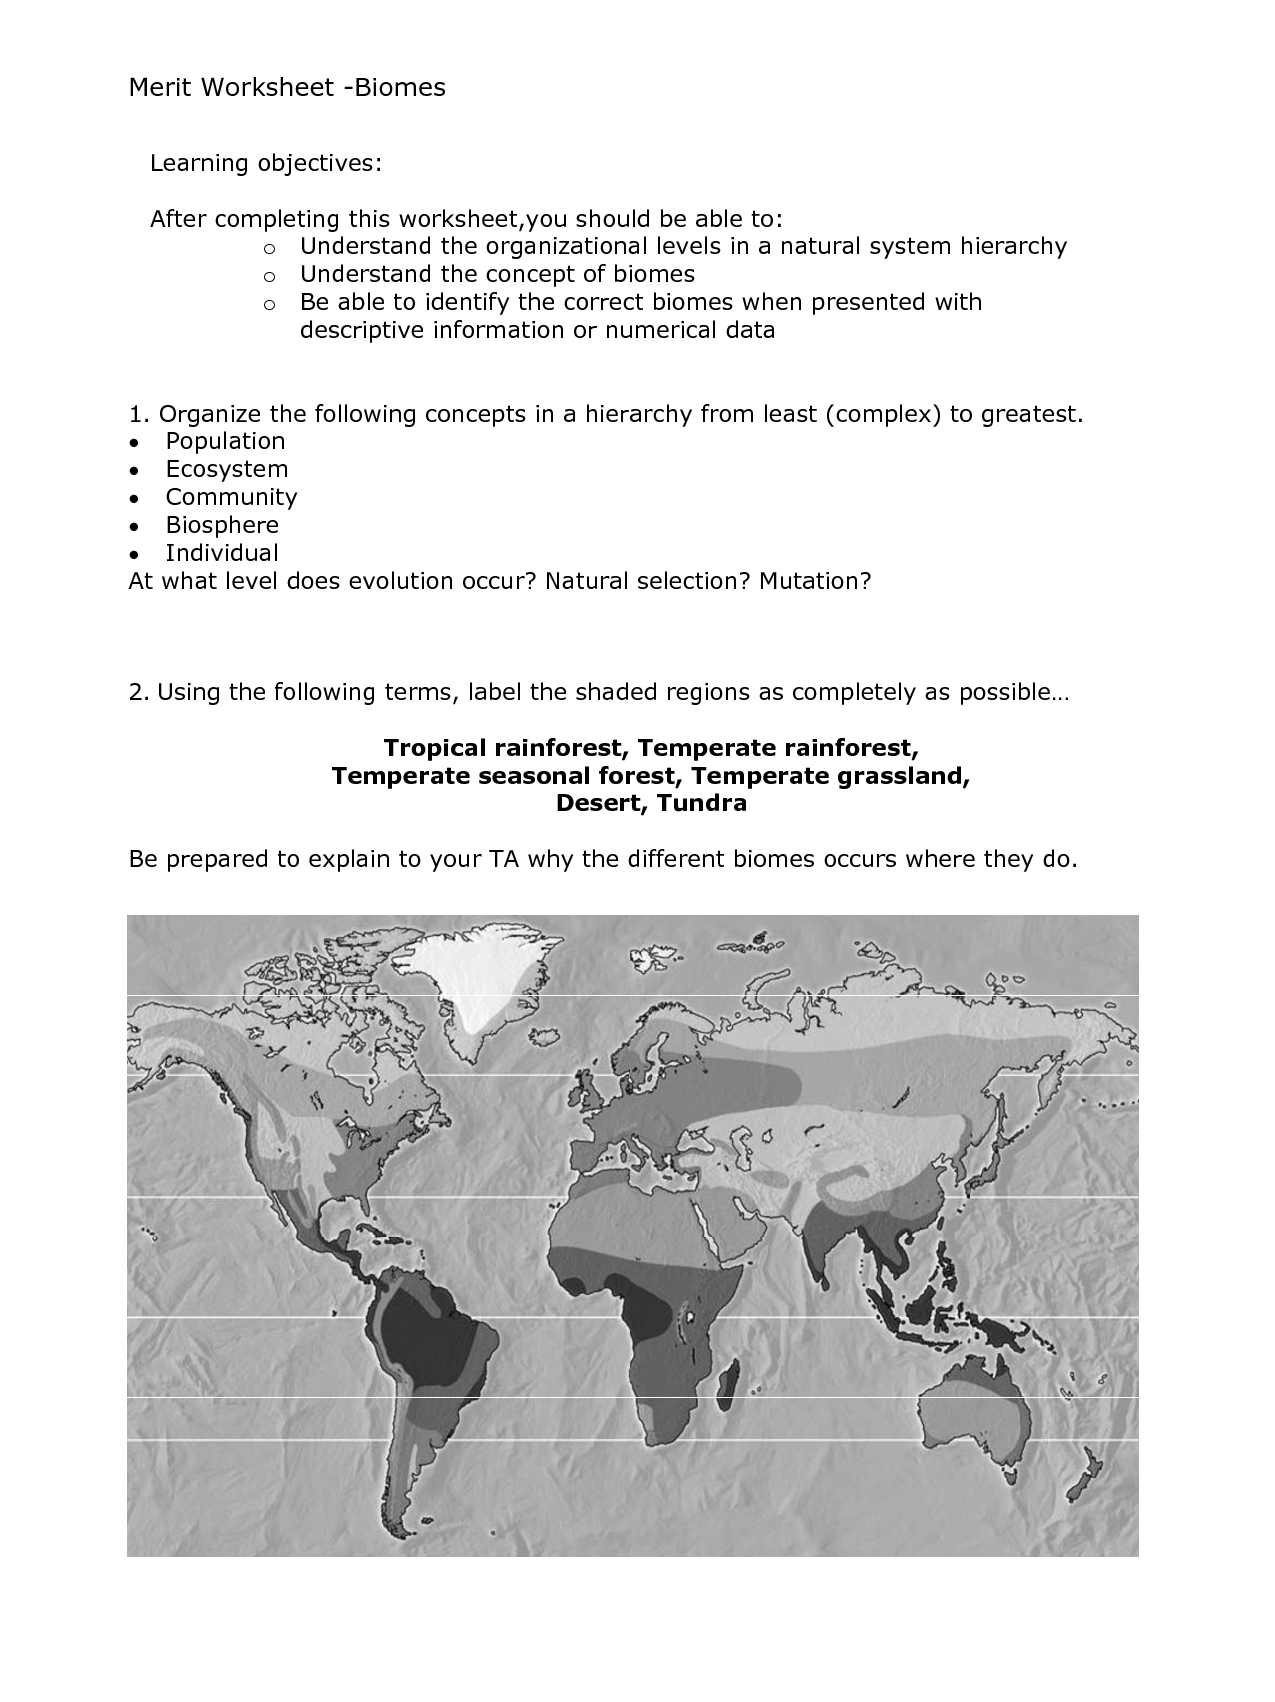 Biome Ecosystems Worksheet Image